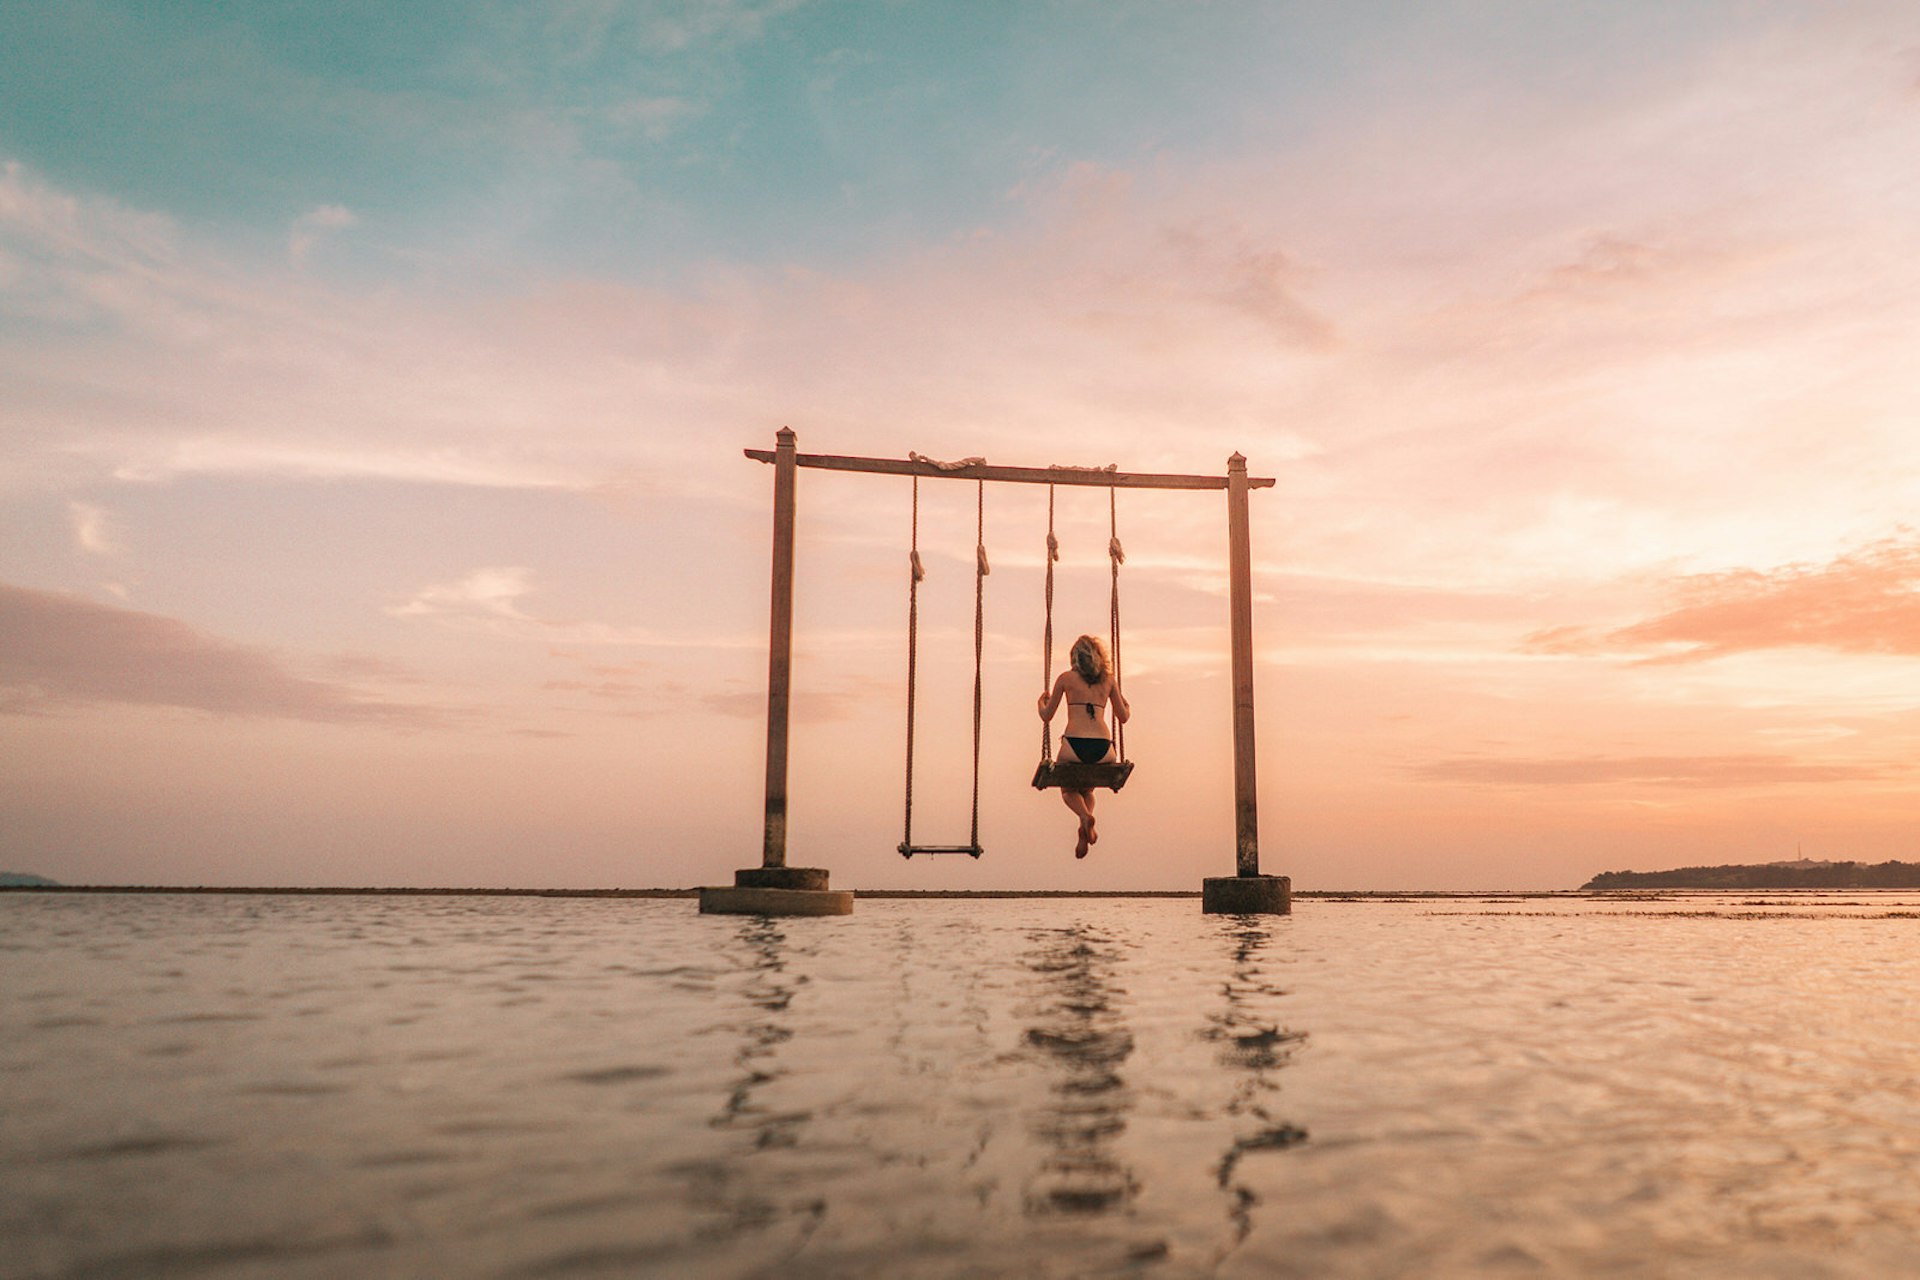 A beautiful pink sunset in Gili Air, Indonesia. There is a large double swing in the sea with the silhouette of a person on one of the swings.